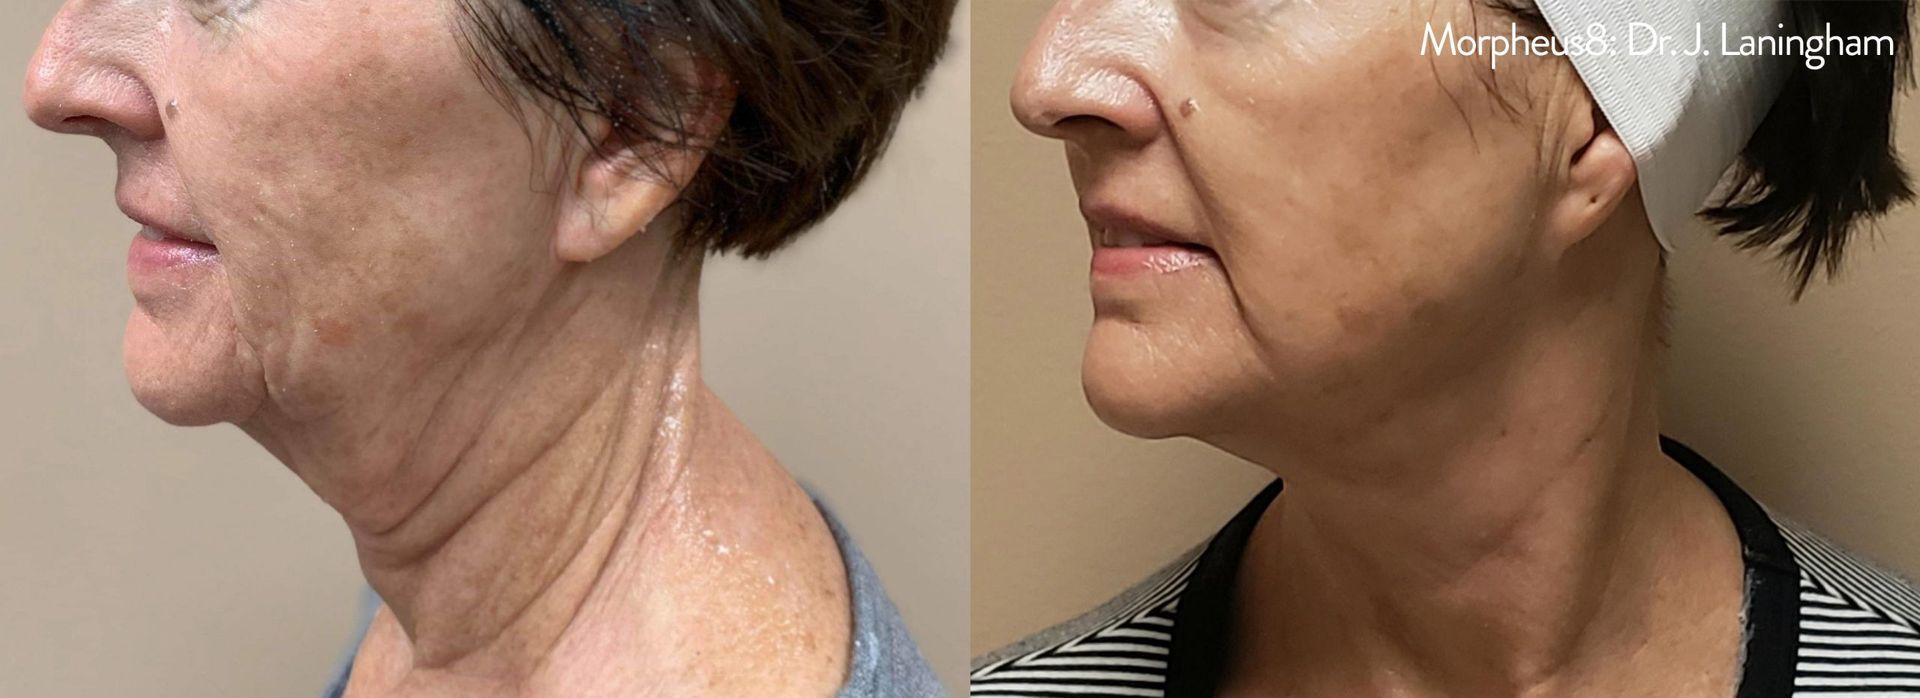 Before & After Morpheus8 Treatment